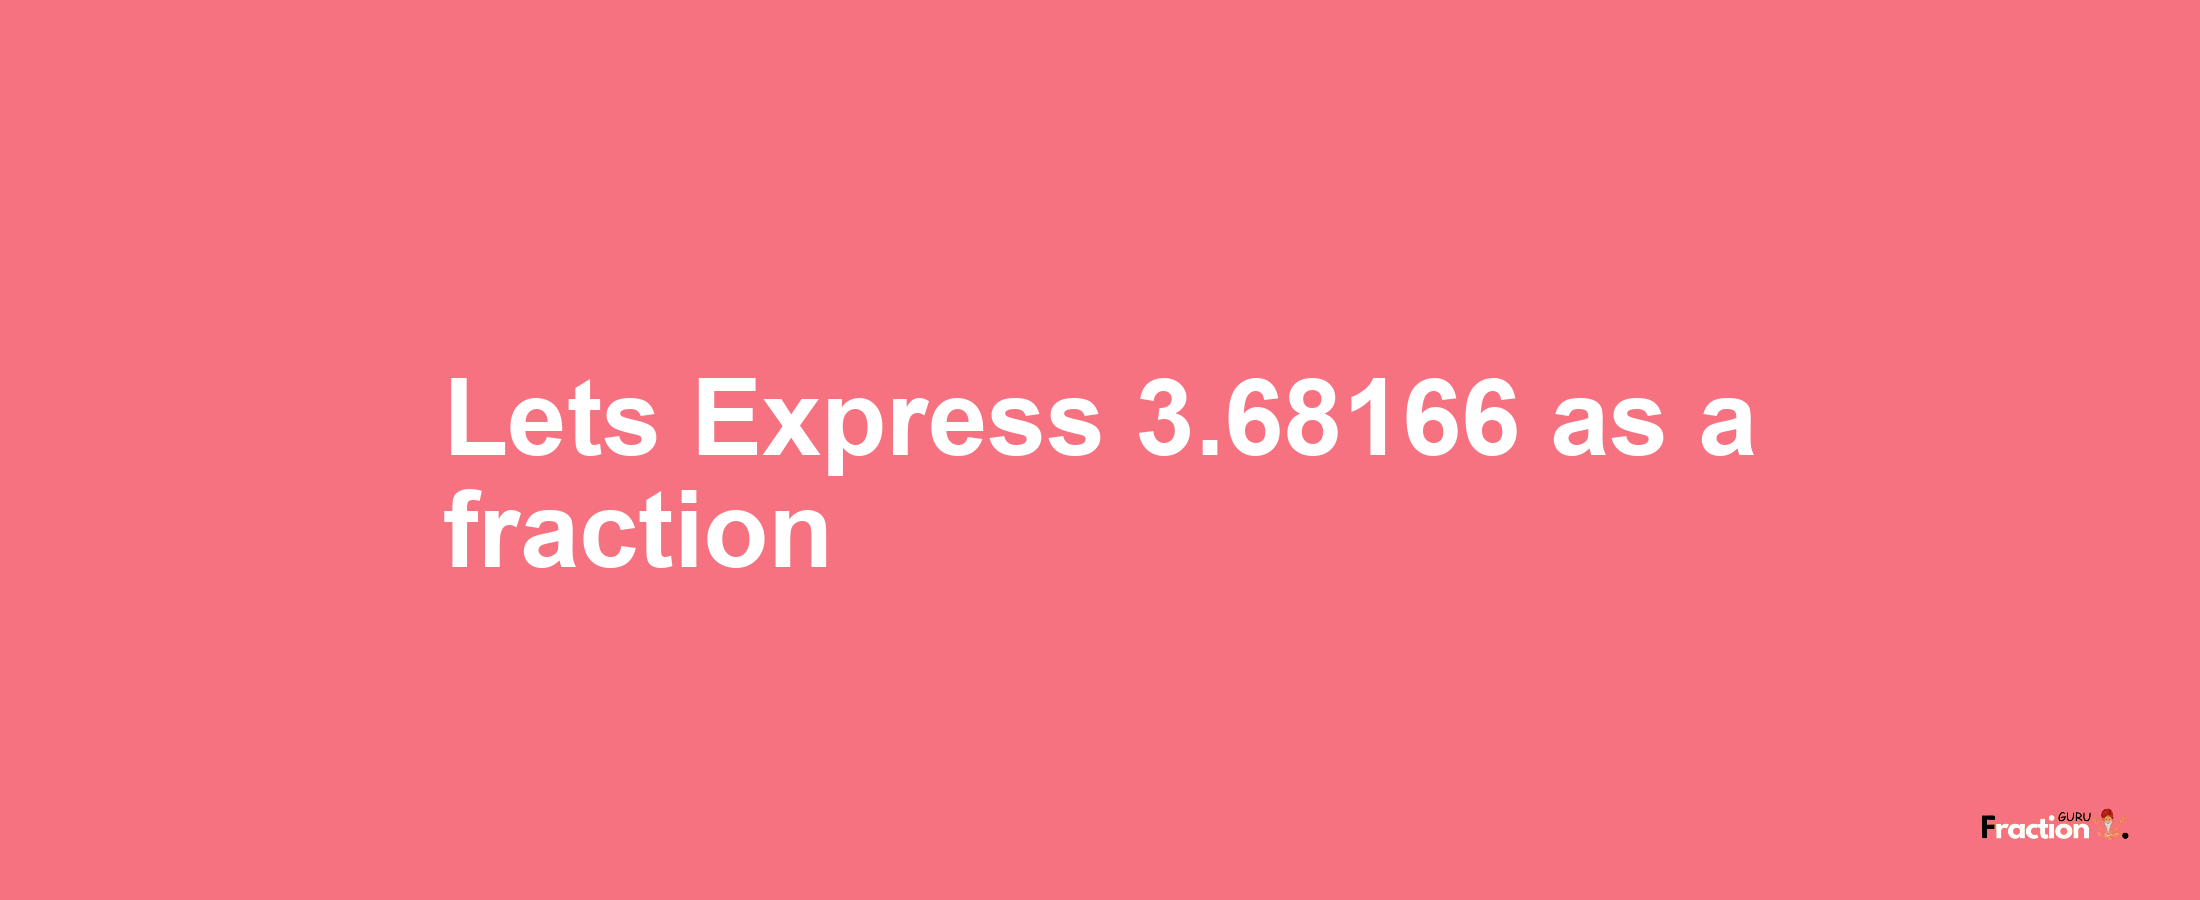 Lets Express 3.68166 as afraction